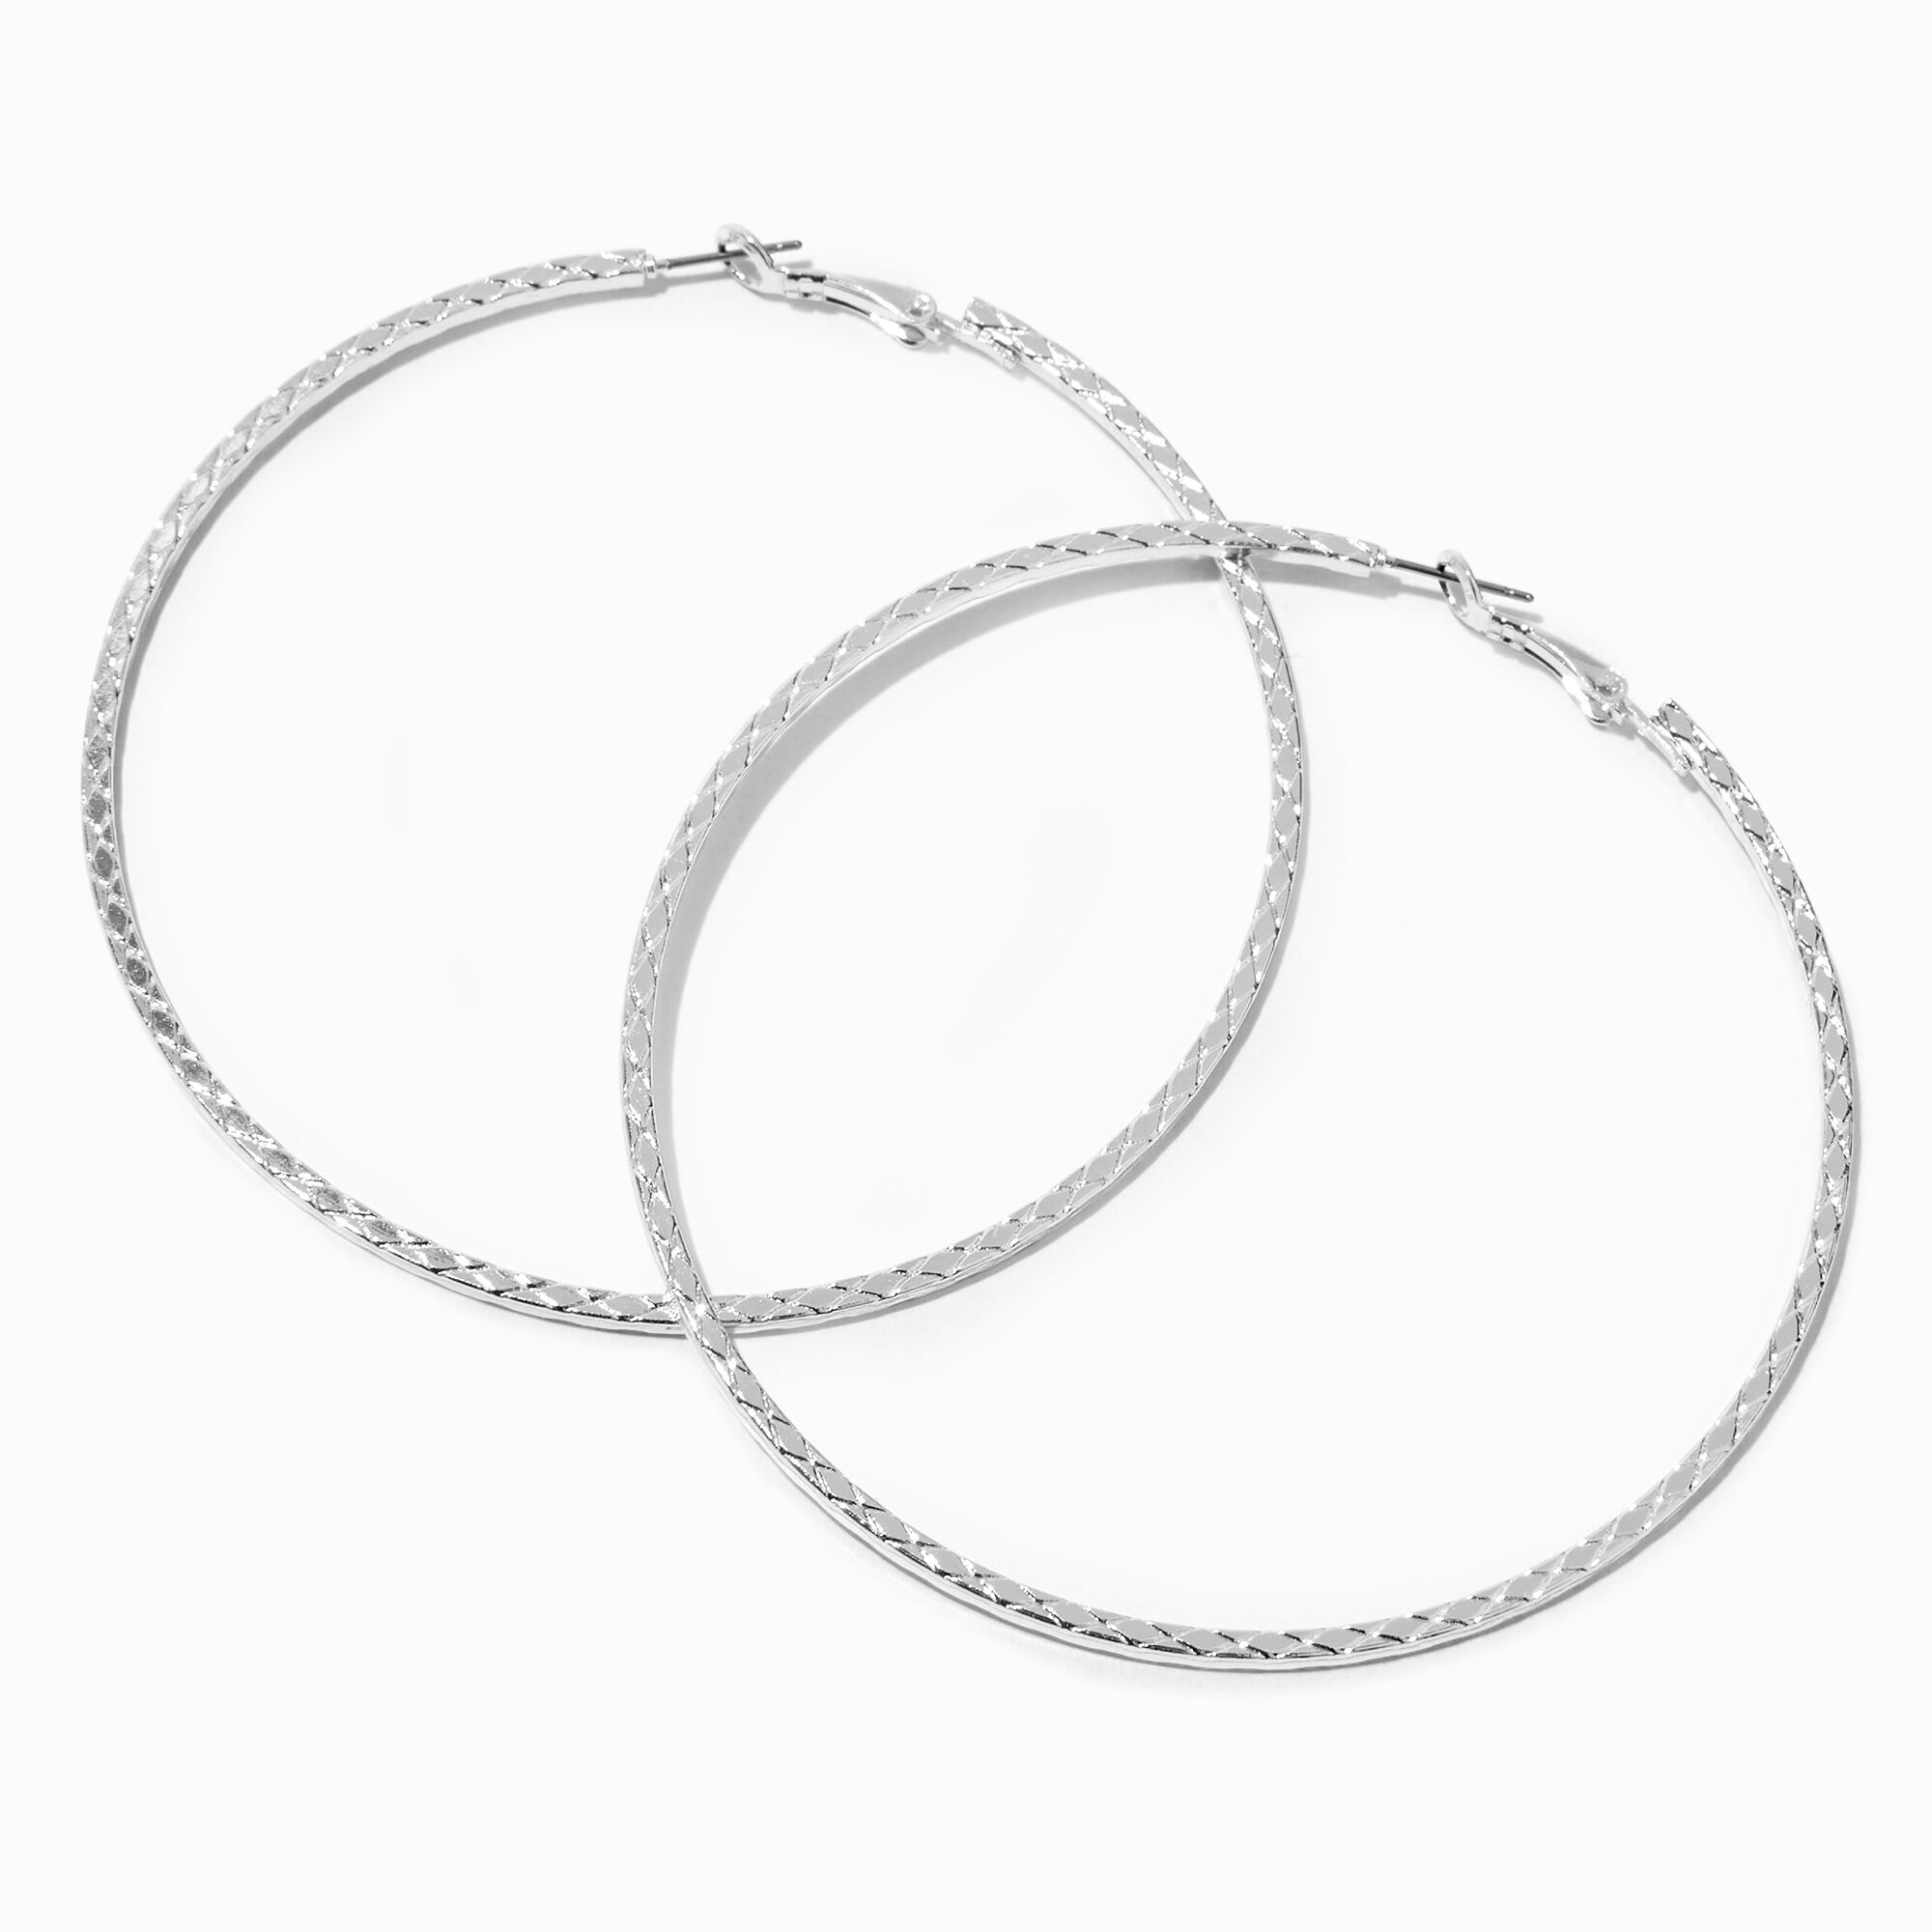 View Claires Tone Textured Snakeskin 80MM Hoop Earrings Silver information